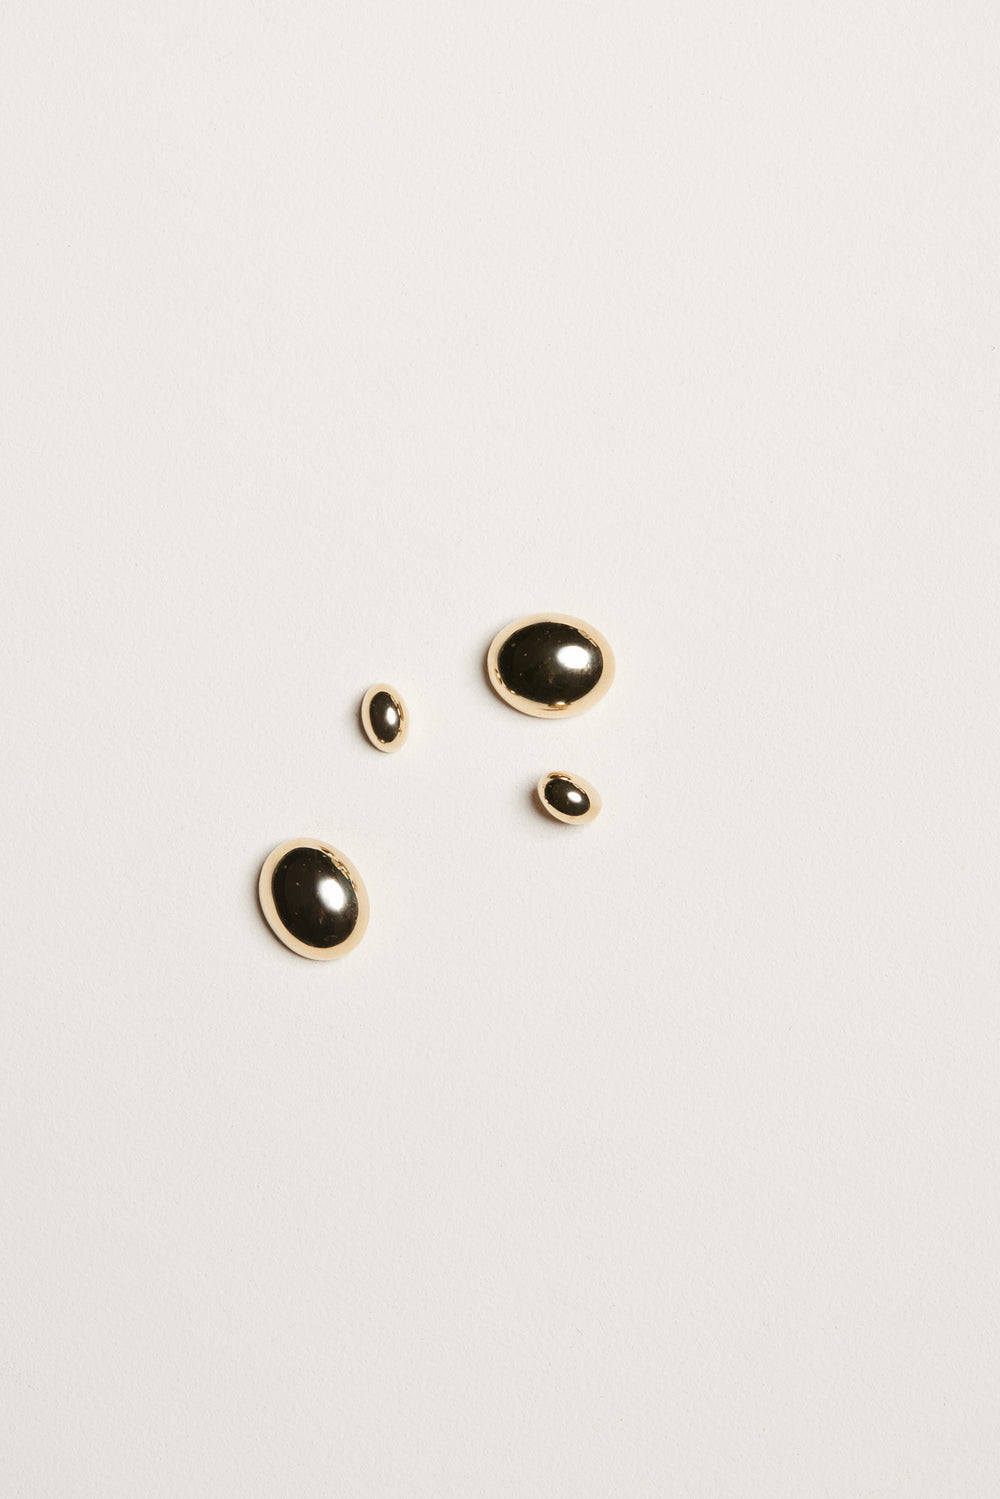 Vivienne Large Oval Studs | Silver or 9K White Gold, More Options Available| Natasha Schweitzer